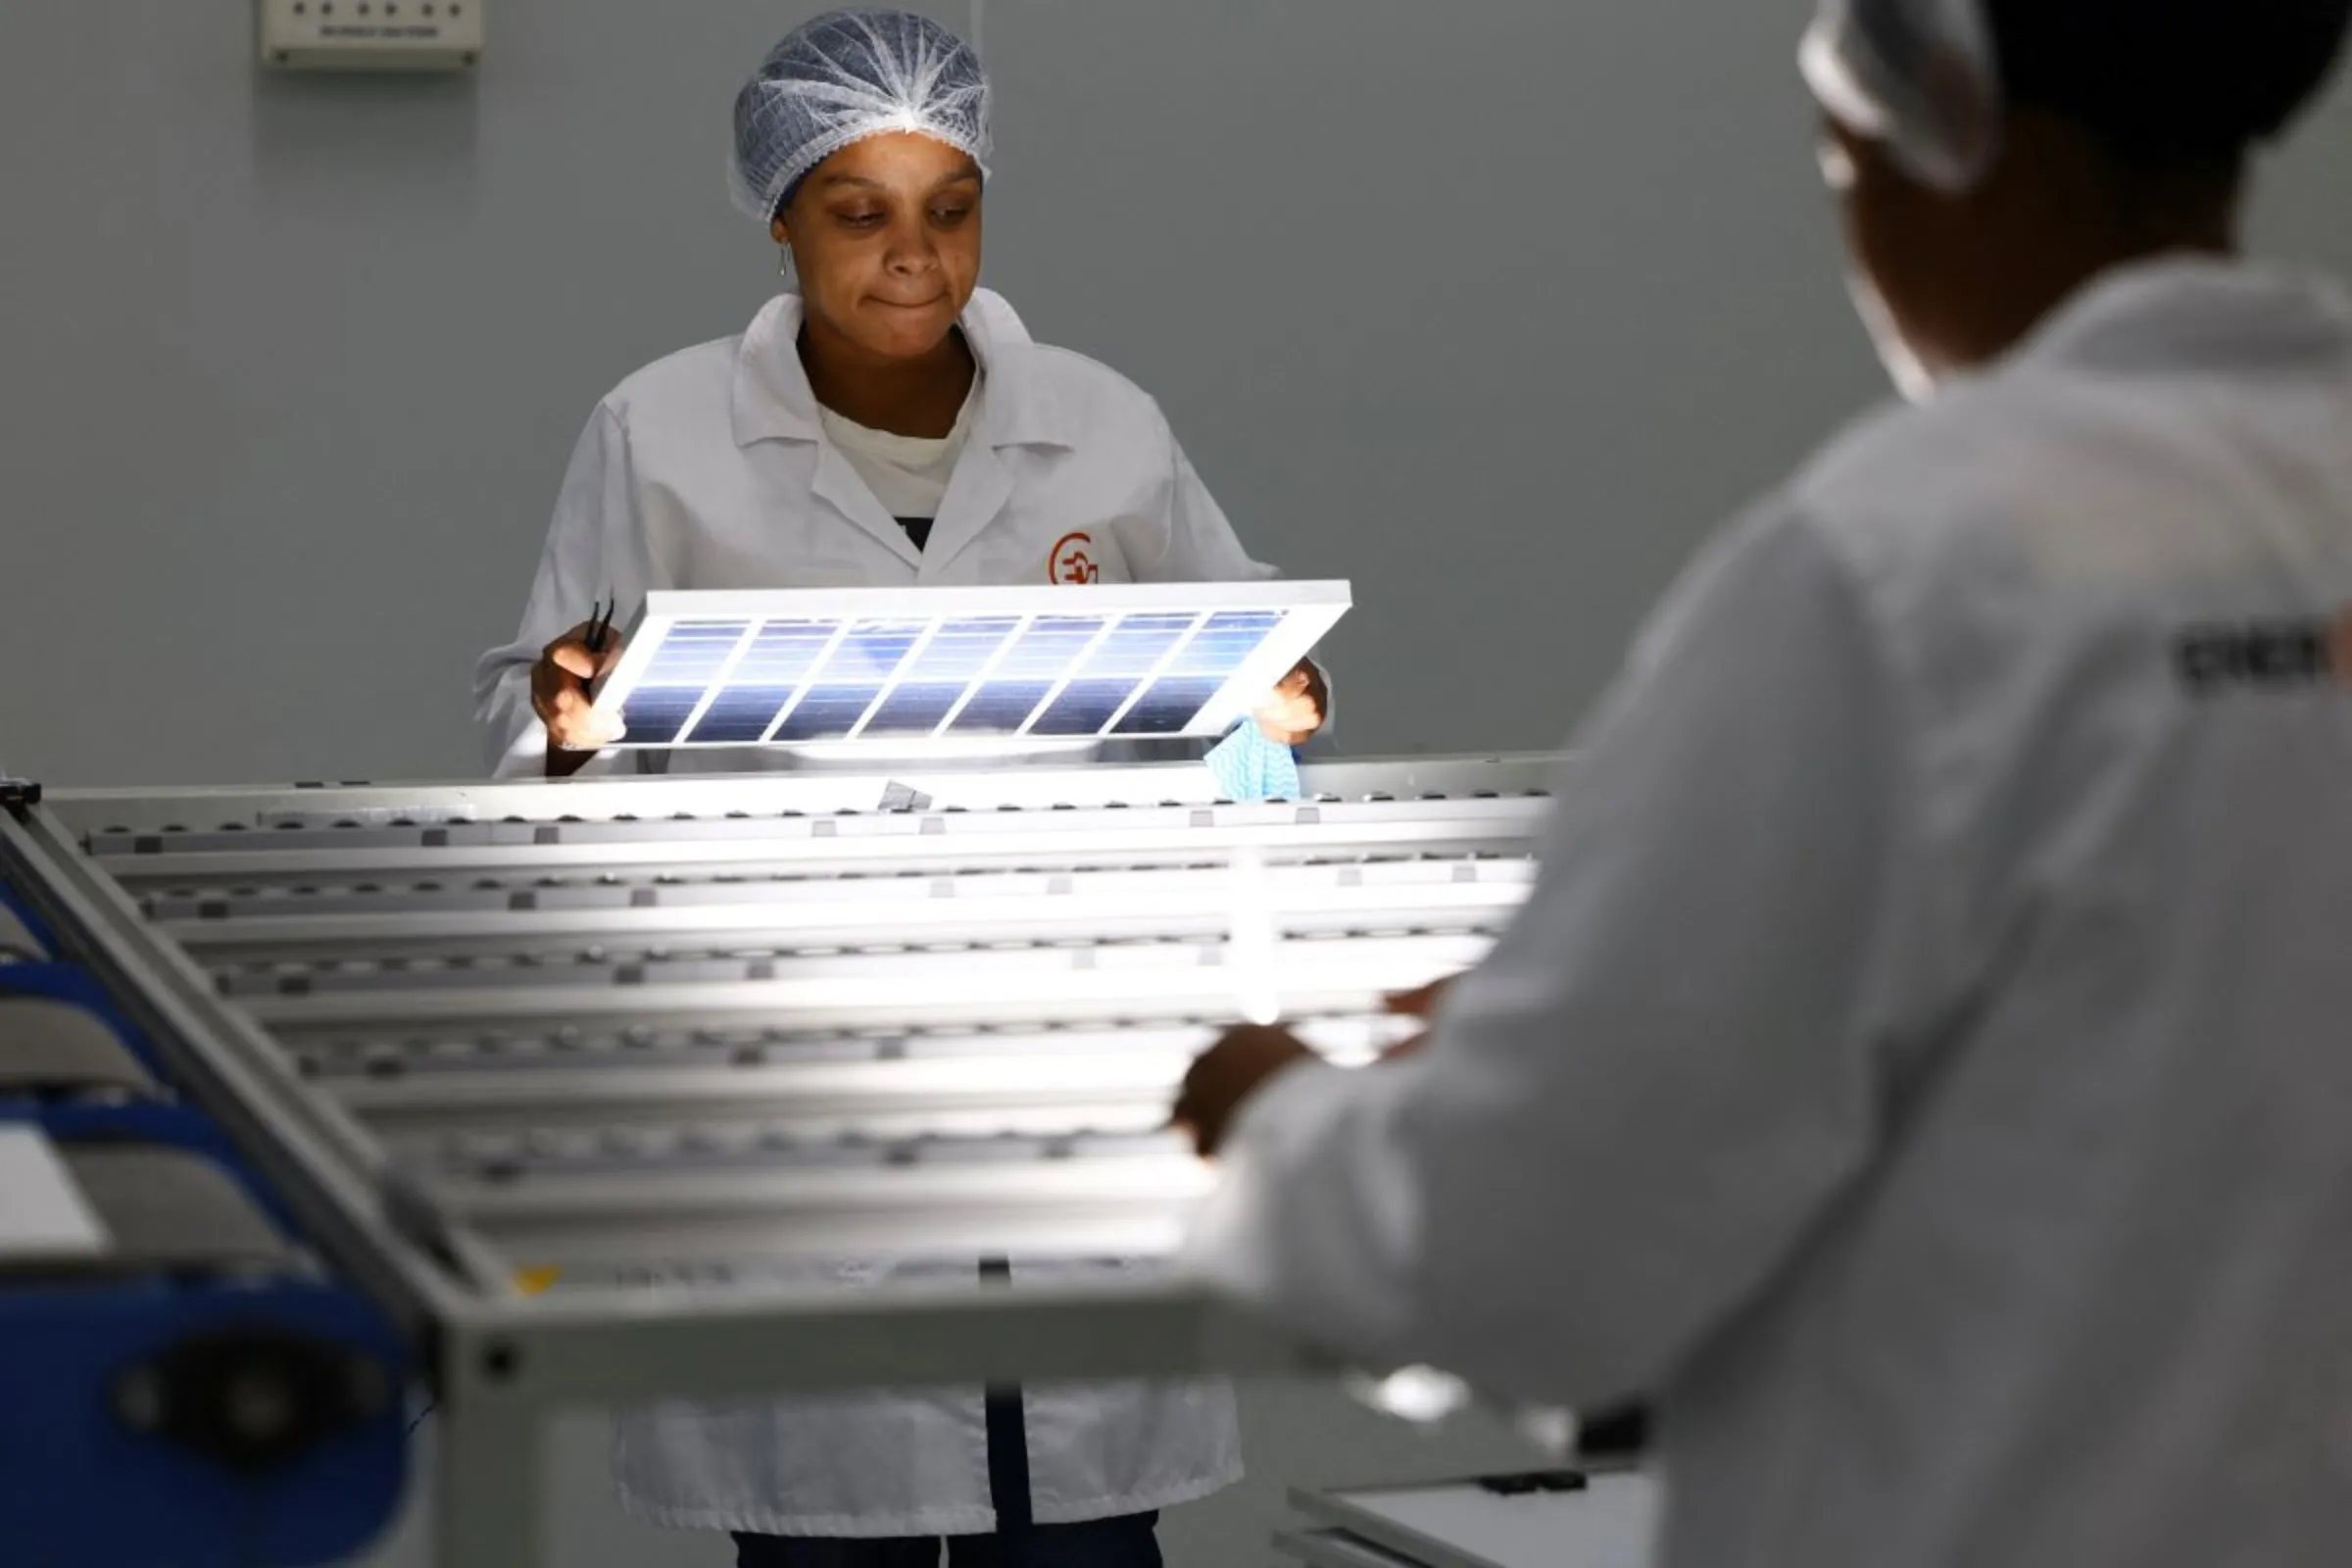 A woman looks at a solar panel, at a factory called Ener-G-Africa, where high-quality solar panels made by an all-women team are produced, in Cape Town, South Africa February 9, 2023